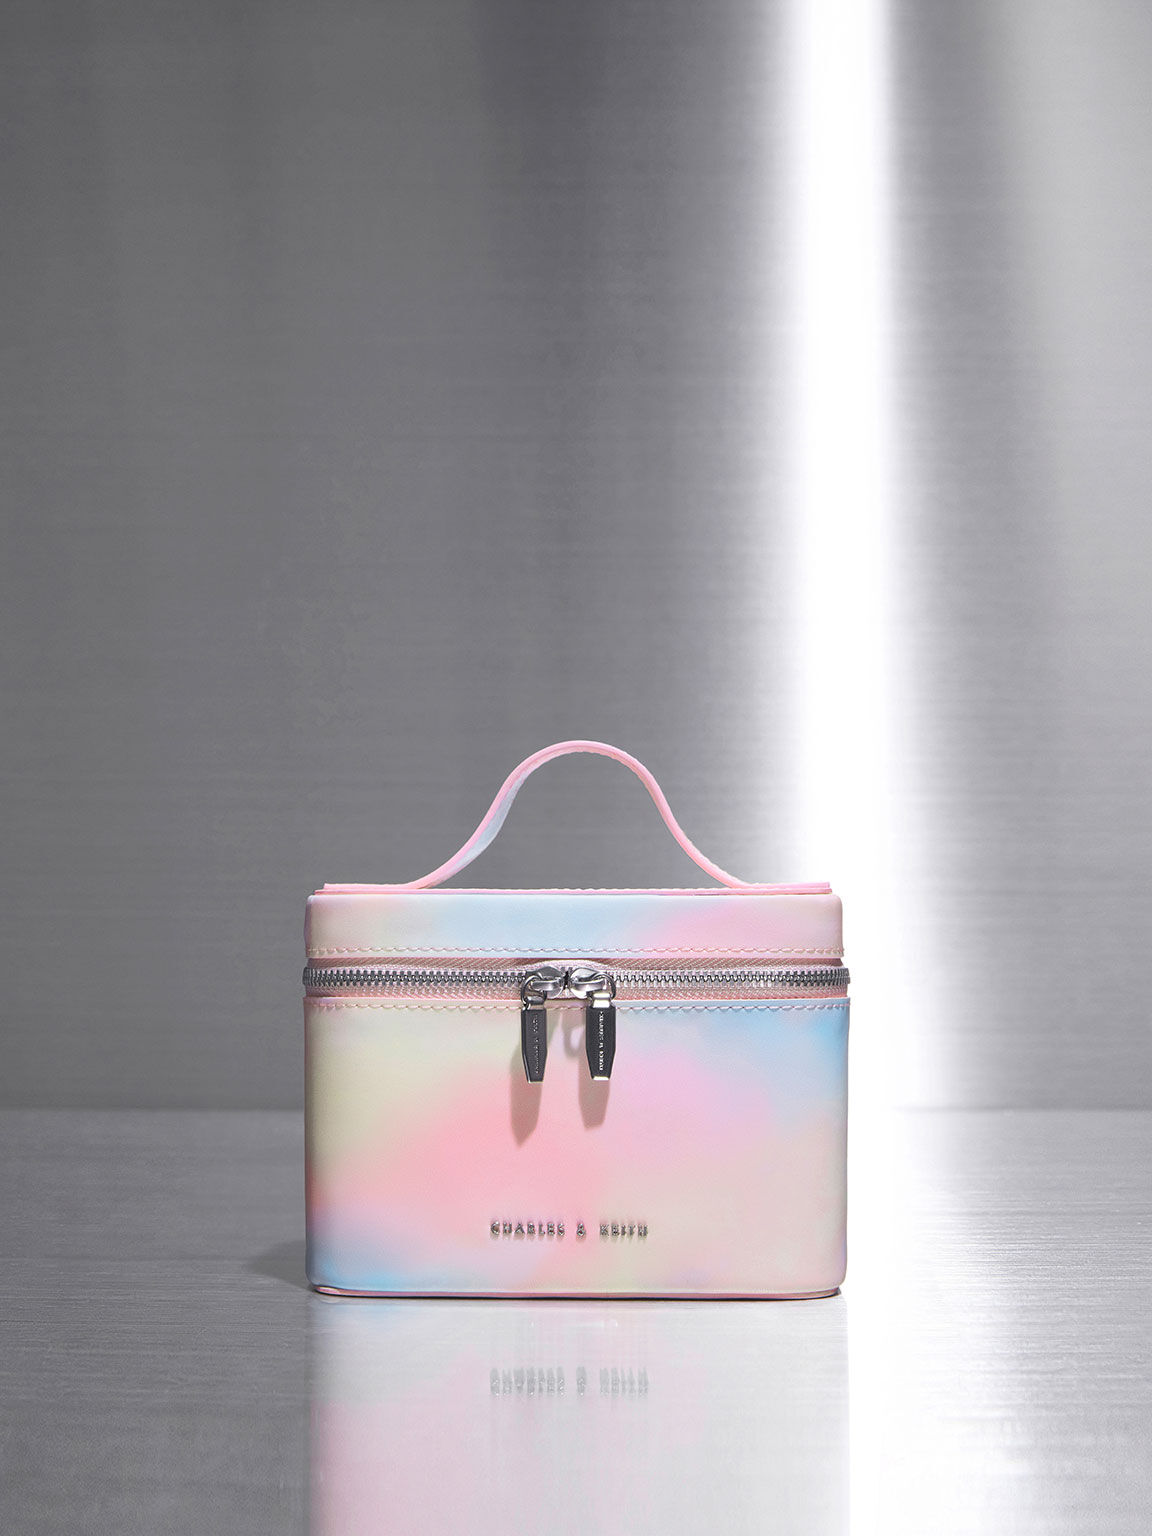 Stylish Gifts For Women  Holiday 2021 - CHARLES & KEITH International